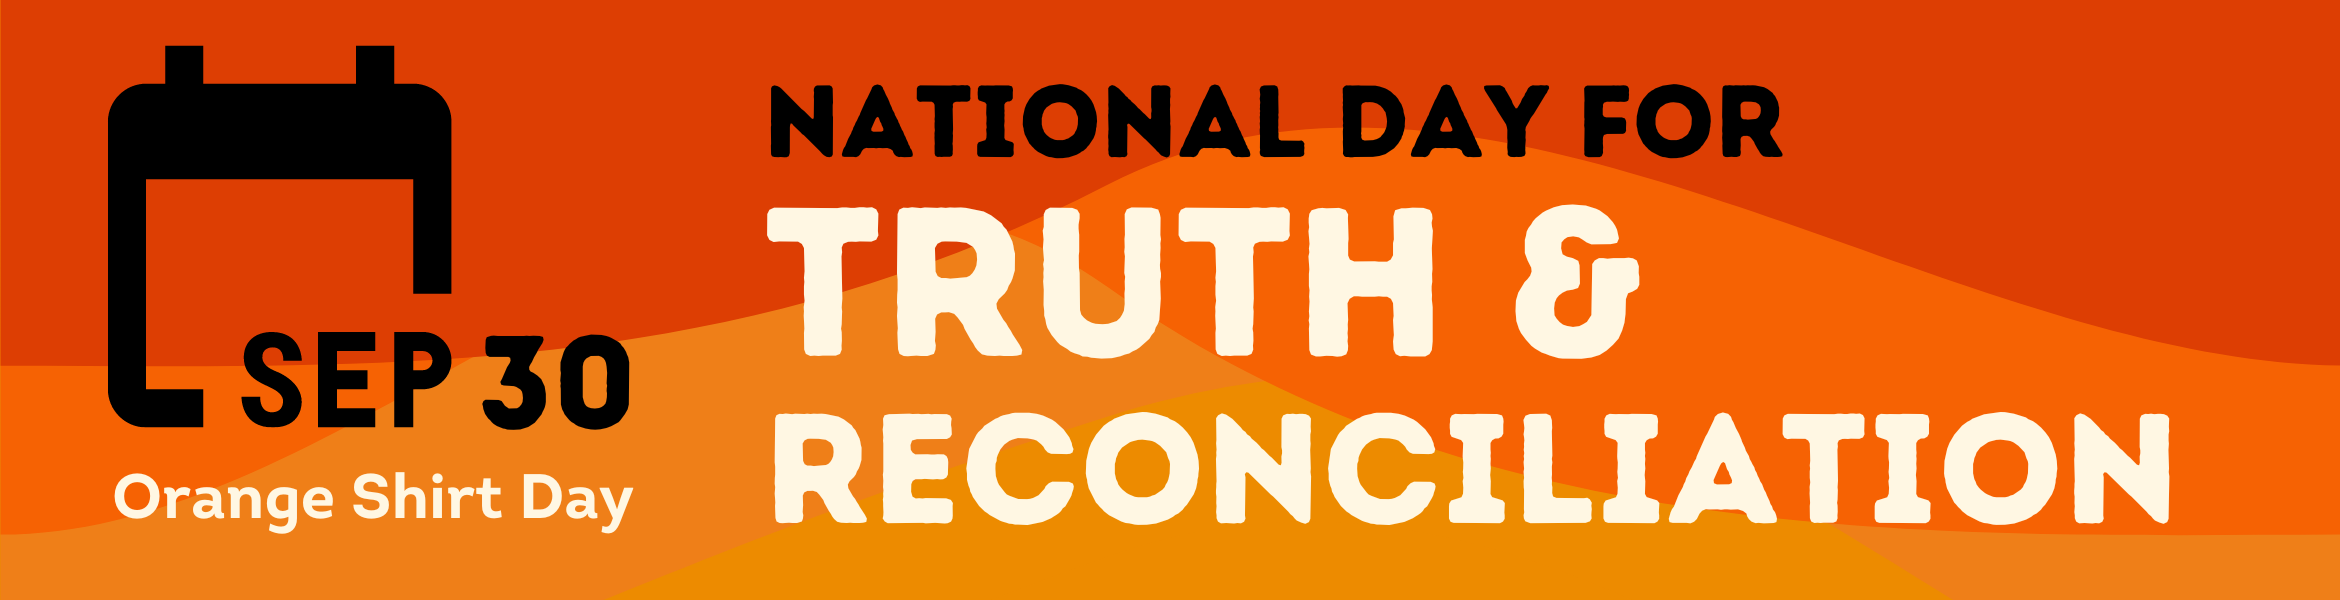 Sept 30: National Day for Truth & Reconciliation (Orange Shirt Day)